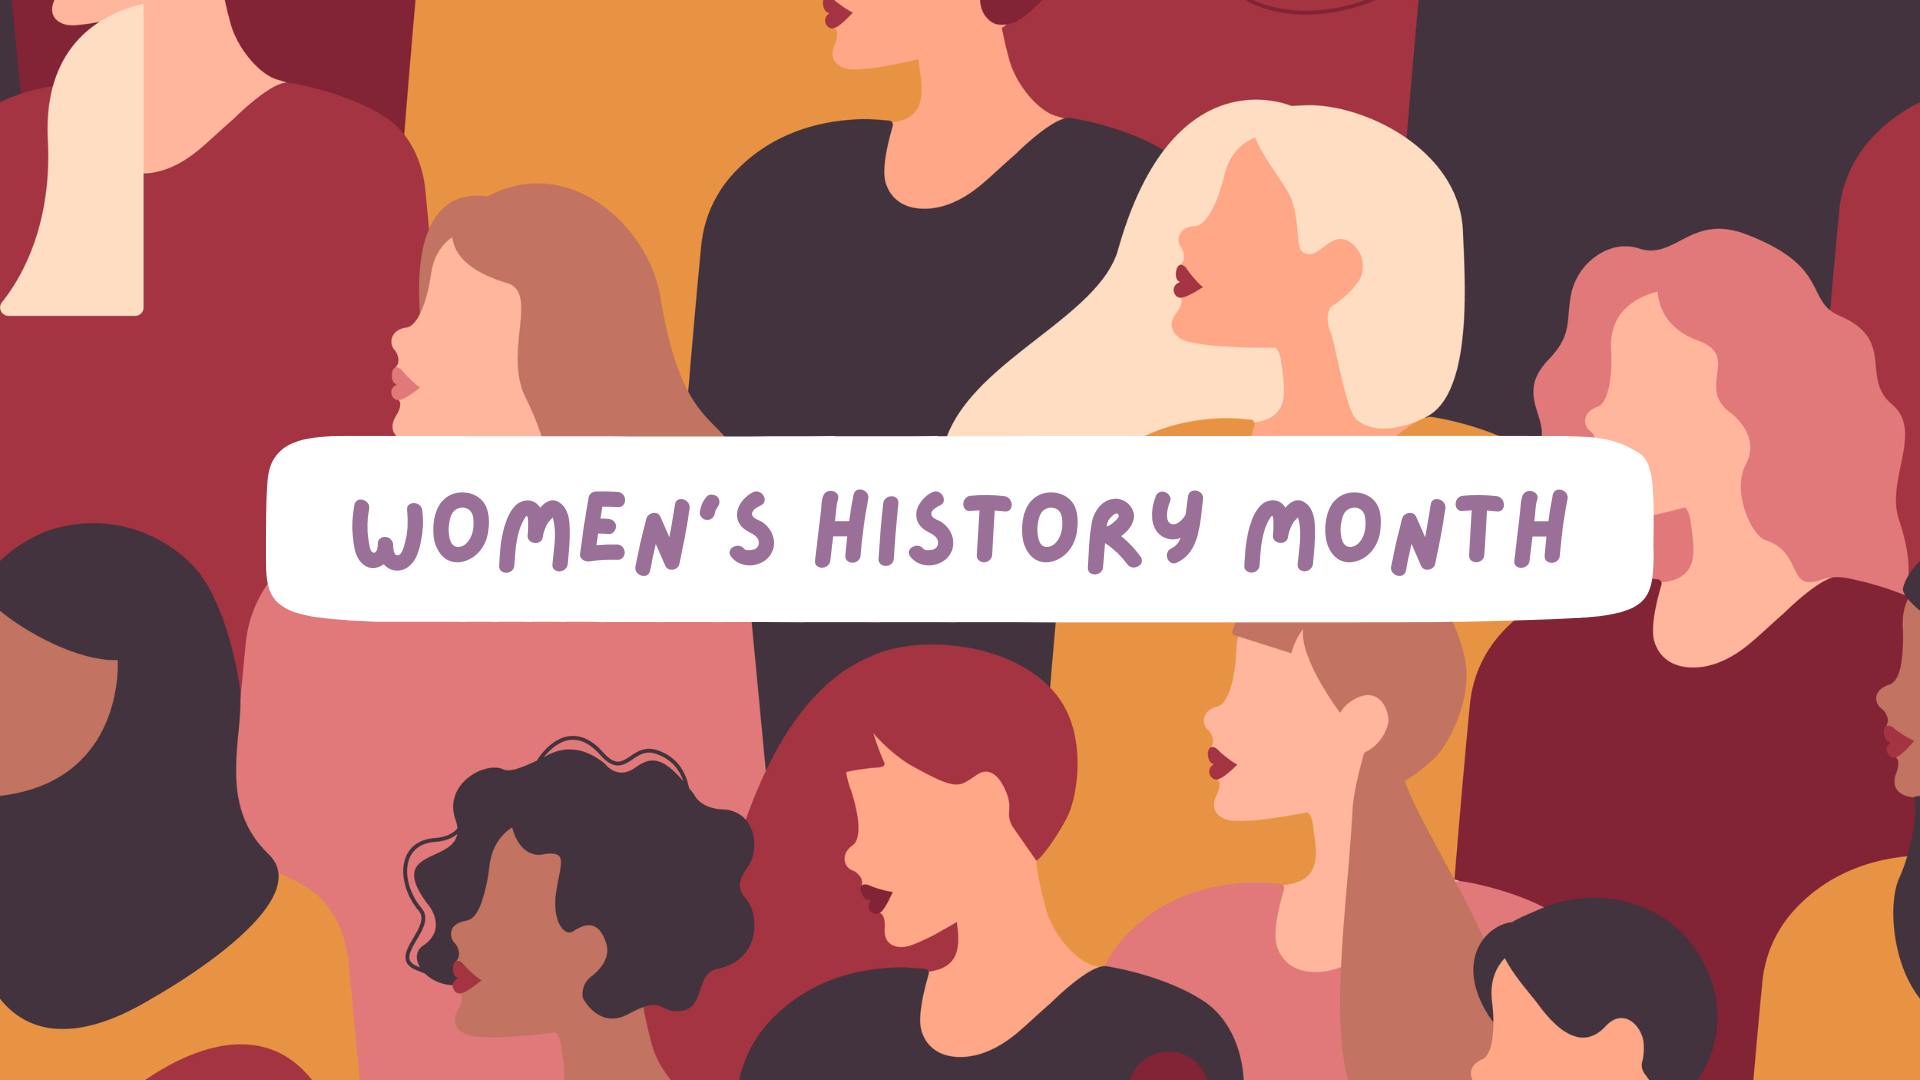 Featured image for “Women’s History Month”